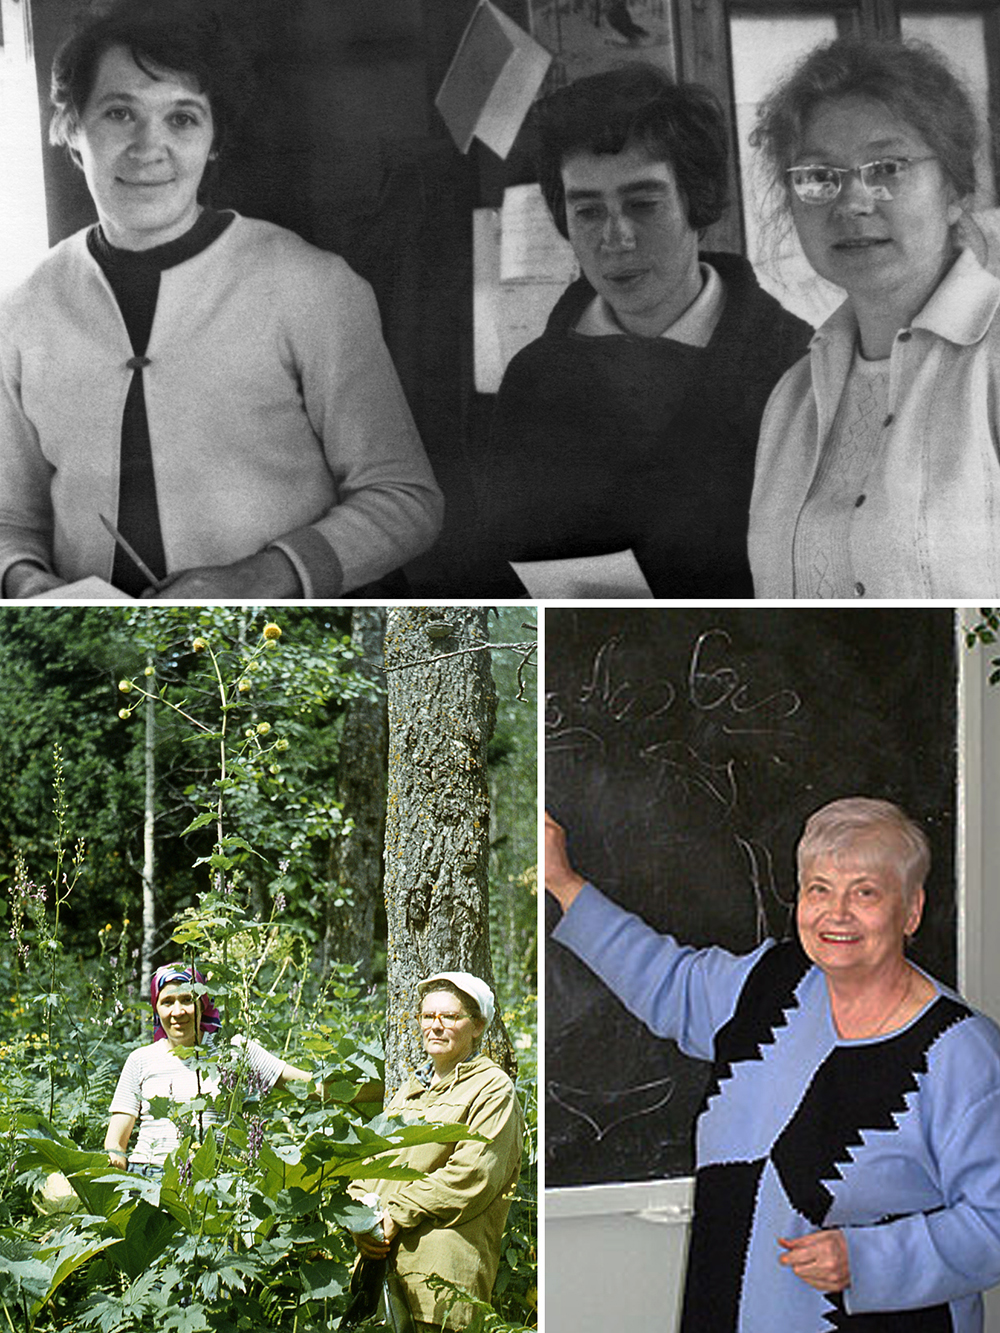 Figure 2. Professor Olga V. Smirnova’s colleagues (start). Top: Olga V. Smirnova with Alexey A. Uranov’s students — Inna M. Ermakova (Researcher at the Problem-Centered Biology Laboratory, Moscow State Pedagogical Institute) and Nina M. Grigorieva (Professor of the Chair in Botany of the Moscow State Pedagogical Institute, right), 1974. Bottom left: Among the tall forest herbs with Tatiana I. Serebryakova (Head of Chair in Botany at the Moscow State Pedagogical Institute from 1974 to 1986) during a trip to Salair (Guryevsky District, Kemerovo Oblast), 1982. Photo by M. A. Barinova. Bottom right: Aleksandra A. Chistyakova (Candidate of Biological Sciences, Full Professor at the Chair in Botany, Physiology and Plant Biochemistry, Penza State University), a co-author of Olga V. Smirnova’s principal works devoted to the interacting populations in forest communities